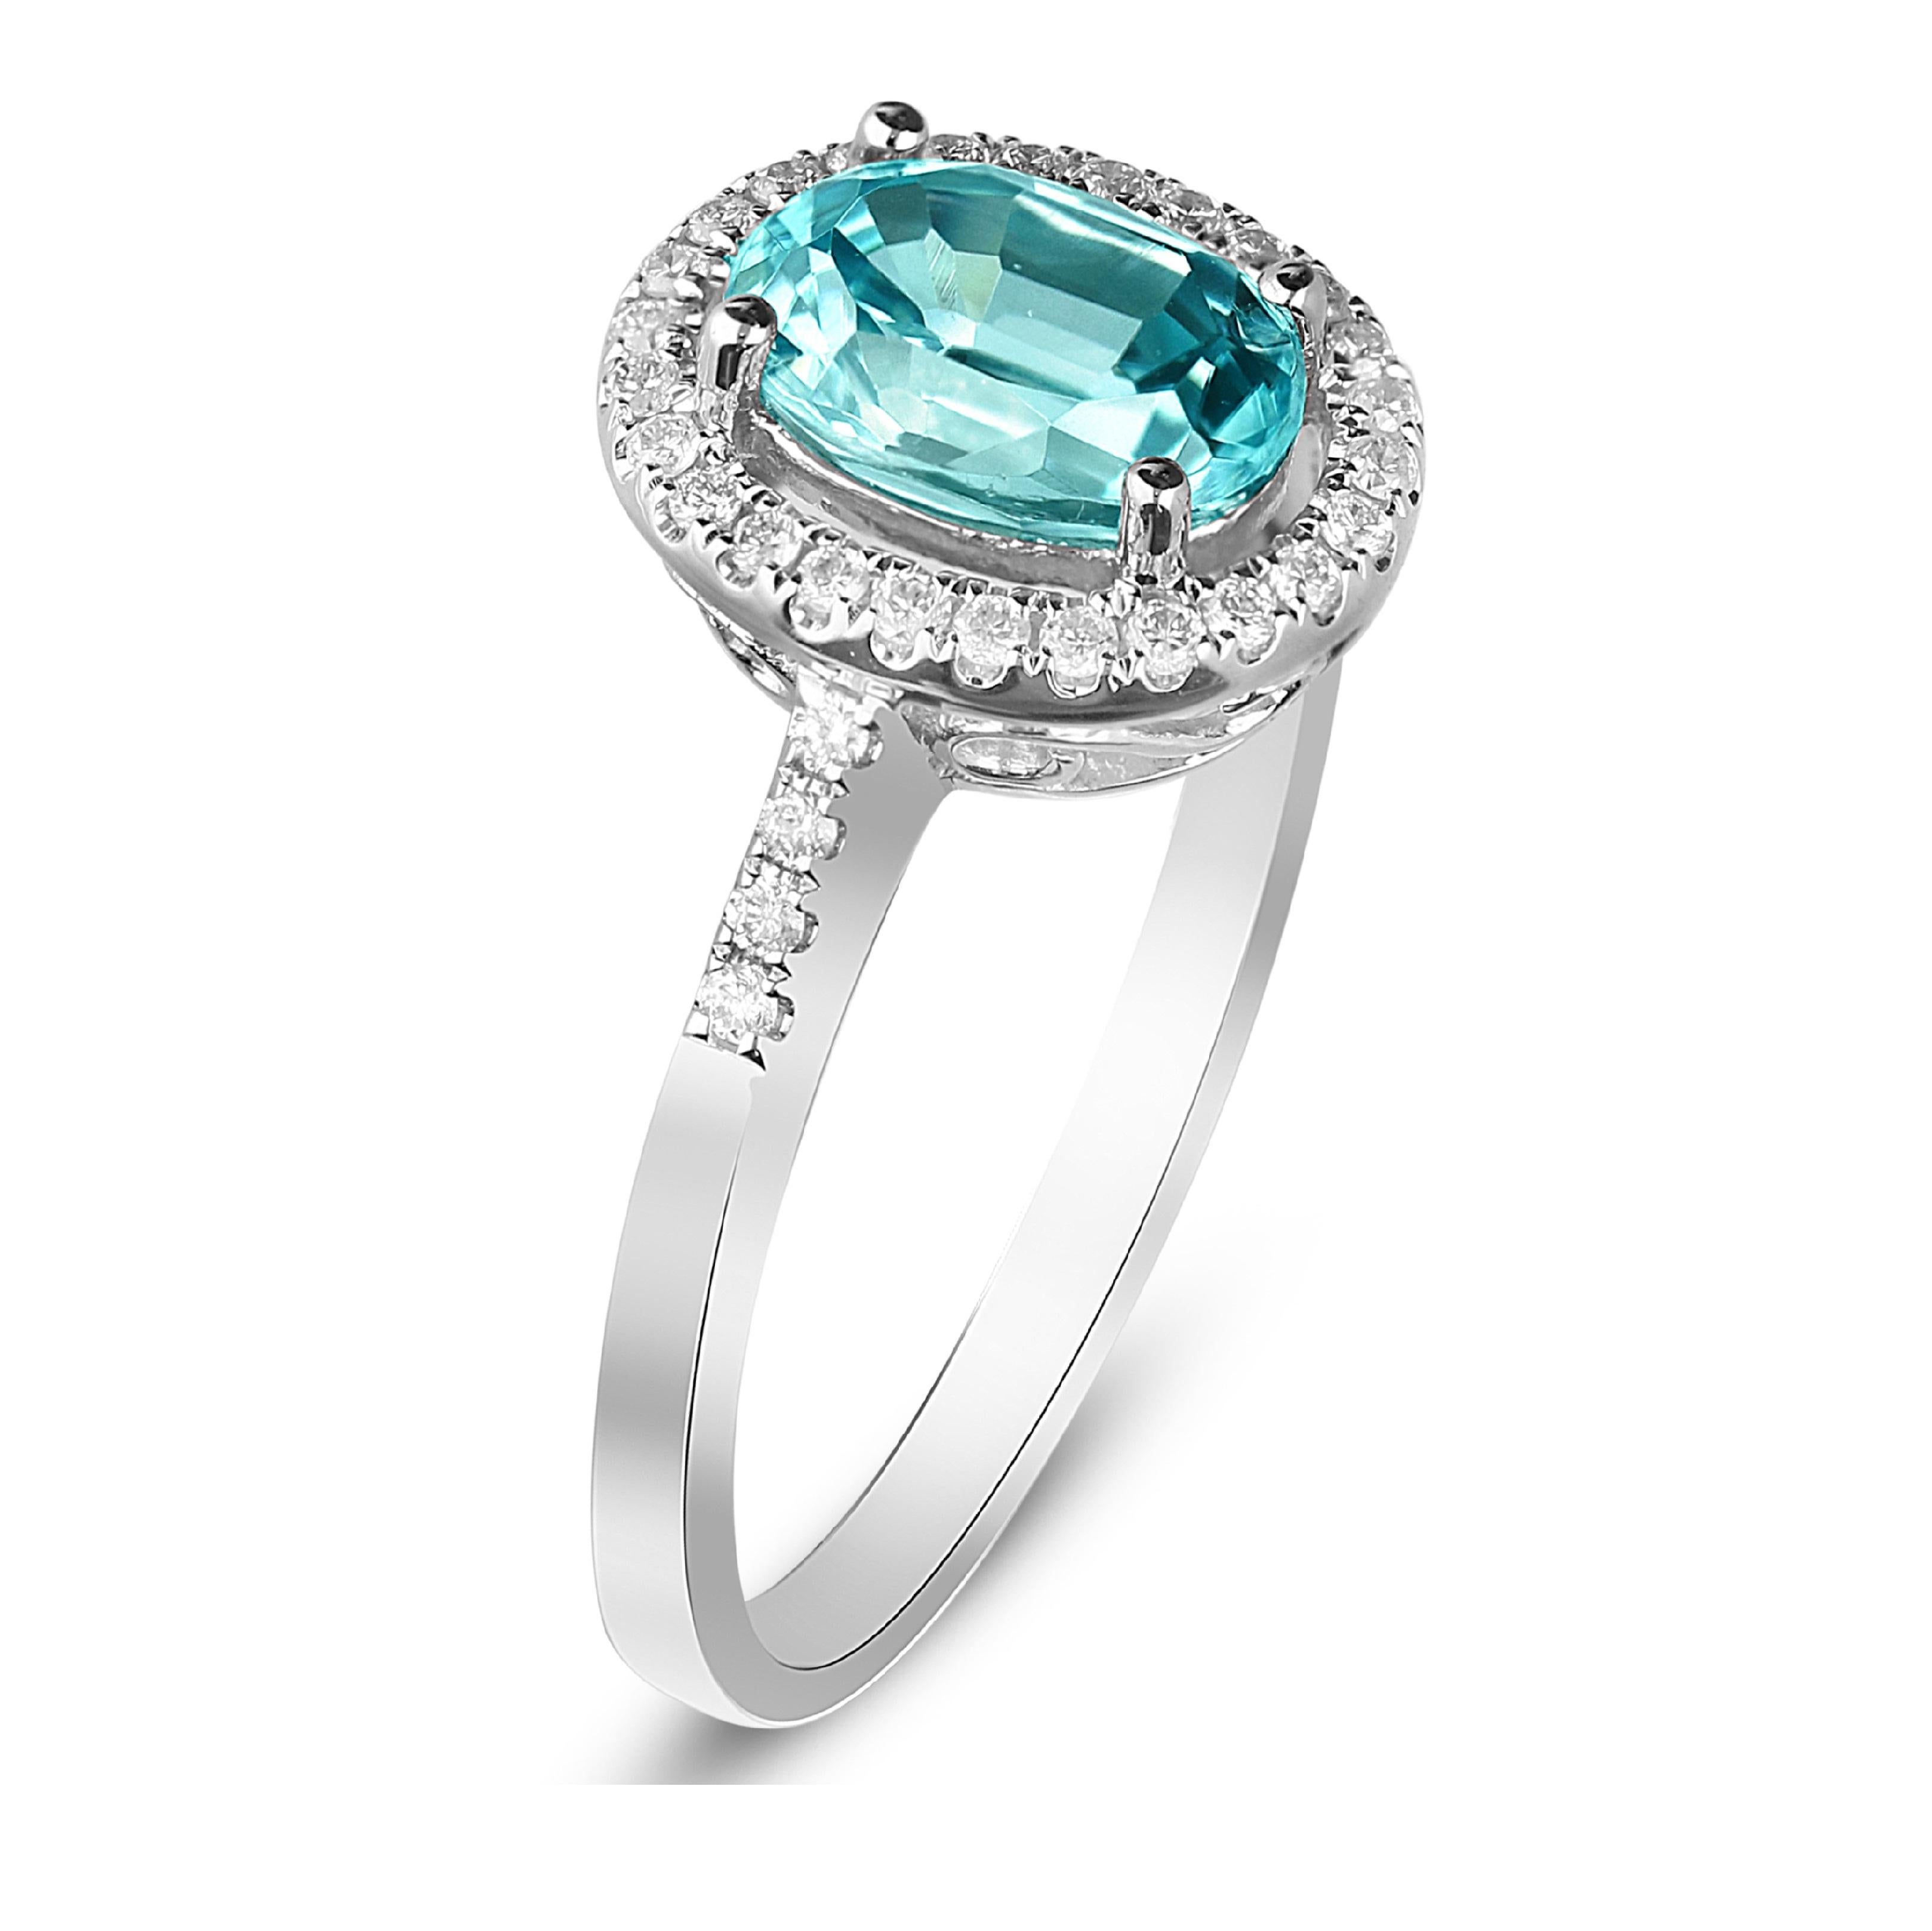 Decorate yourself in elegance with this Ring is crafted from 14-karat White Gold by Gin & Grace. This Ring is made up of 8x6 mm Oval-Cut (1 pcs) 1.94 carat Blue Zircon and Round-cut White Diamond (34 Pcs) 0.18 Carat. This Ring is weight 2.81 grams.